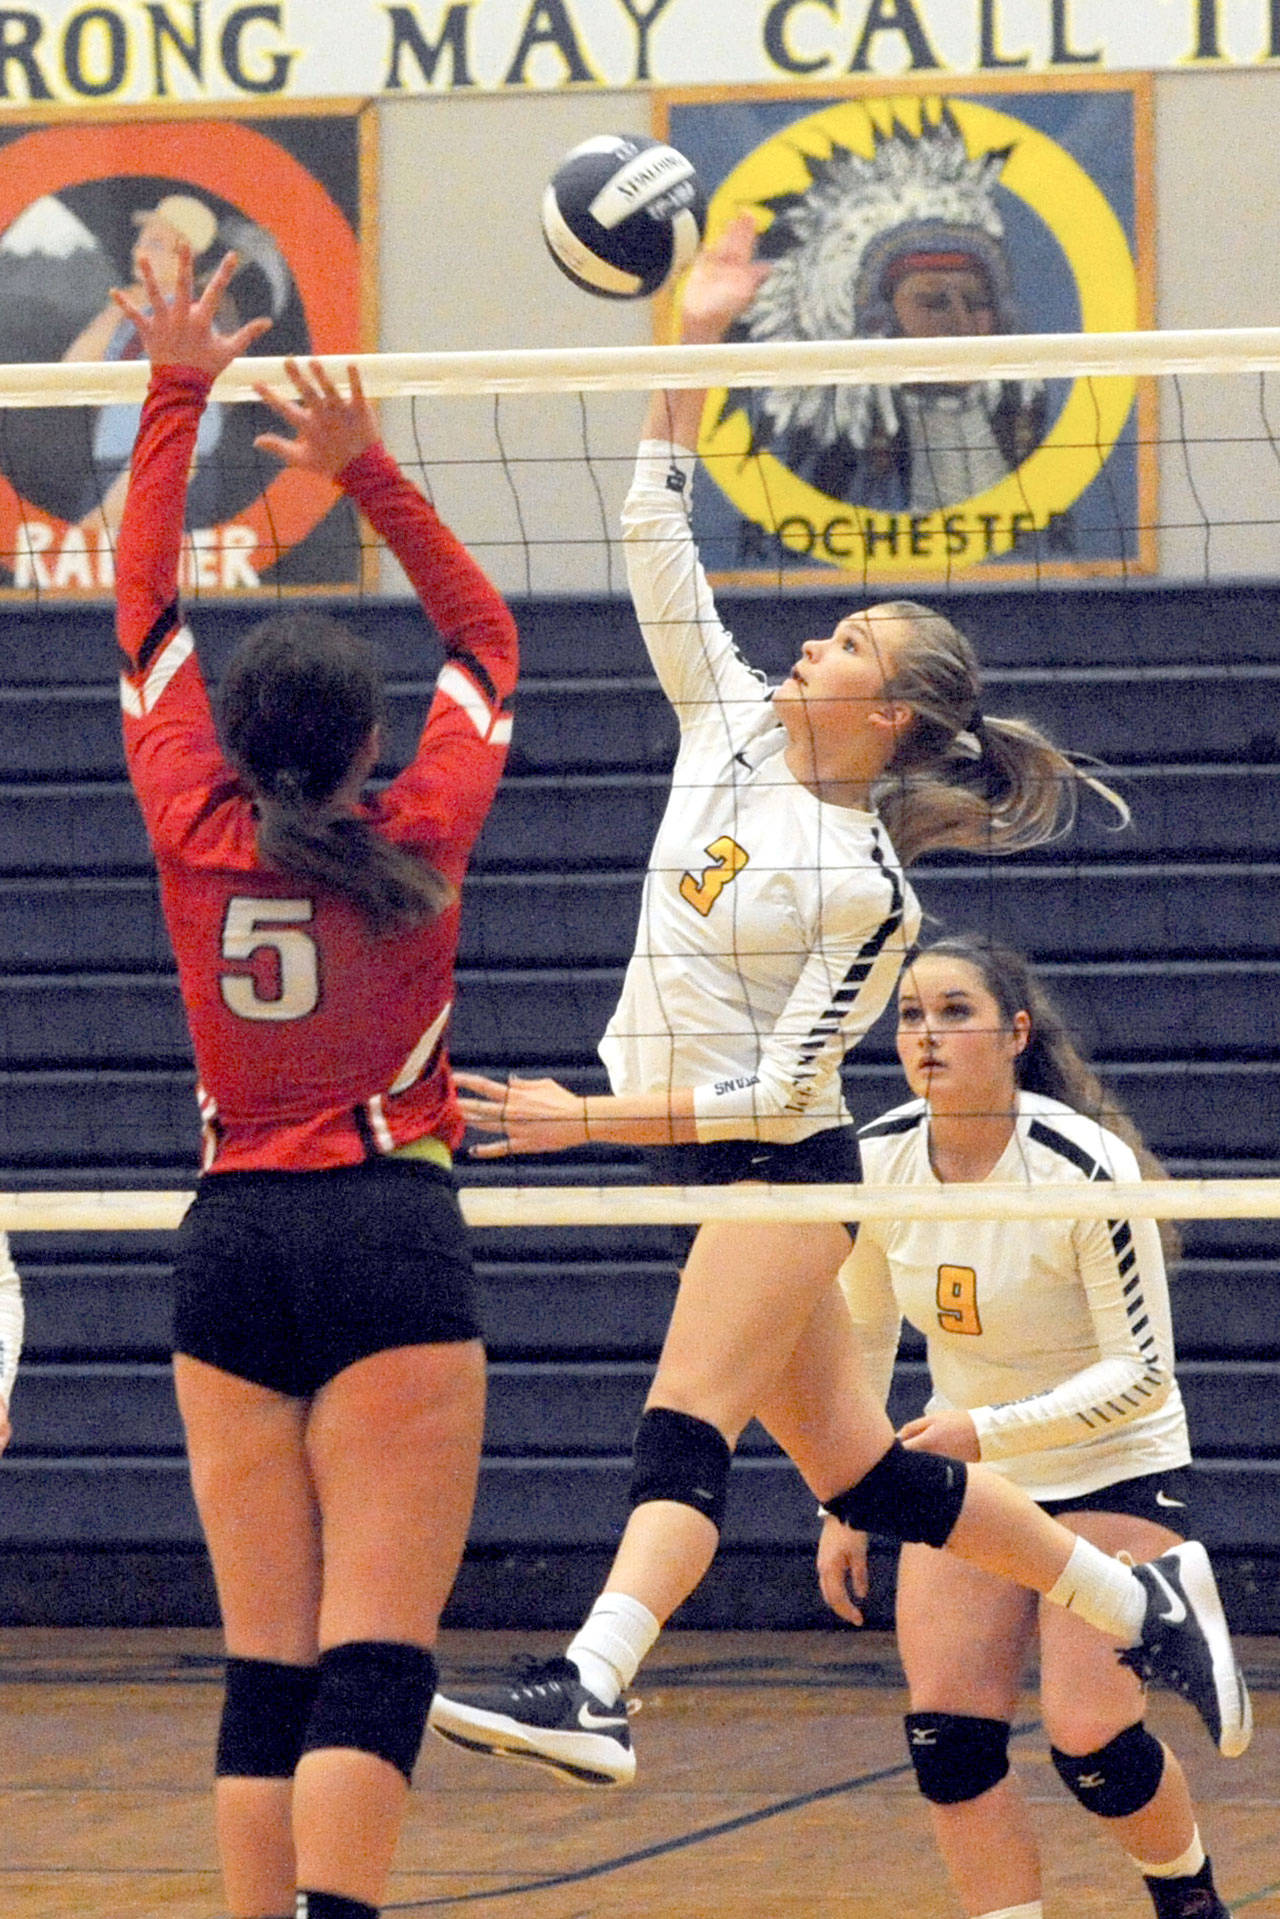 Forks’ Jayden Olson (3) hits against Tenino’s Destiny Neifert (5) during an Evergreen 1A League contest in Forks. Looking on is Forks’ Rian Peters (9). The Spartans defeated the Beavers 25-17, 25-7 and 25-10. (Lonnie Archibald/for Peninsula Daily News)